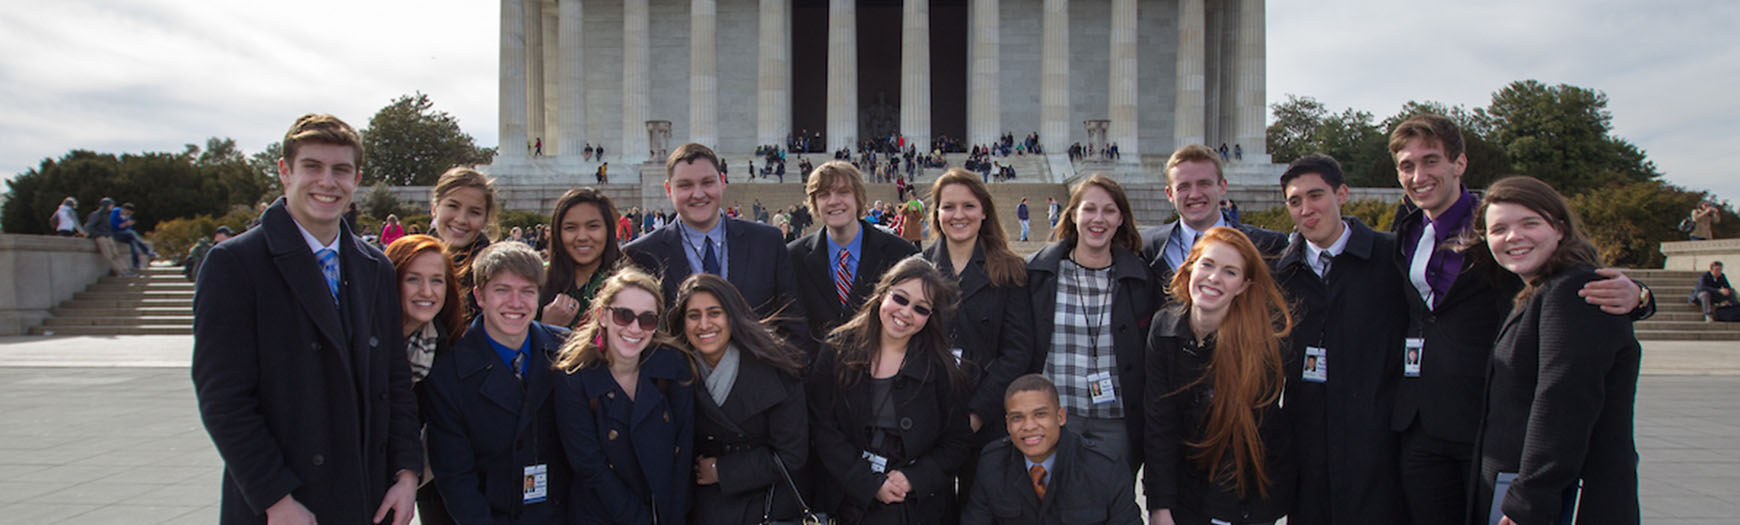 Senate Youth delegates in front of the Lincoln Memorial, Washington, DC